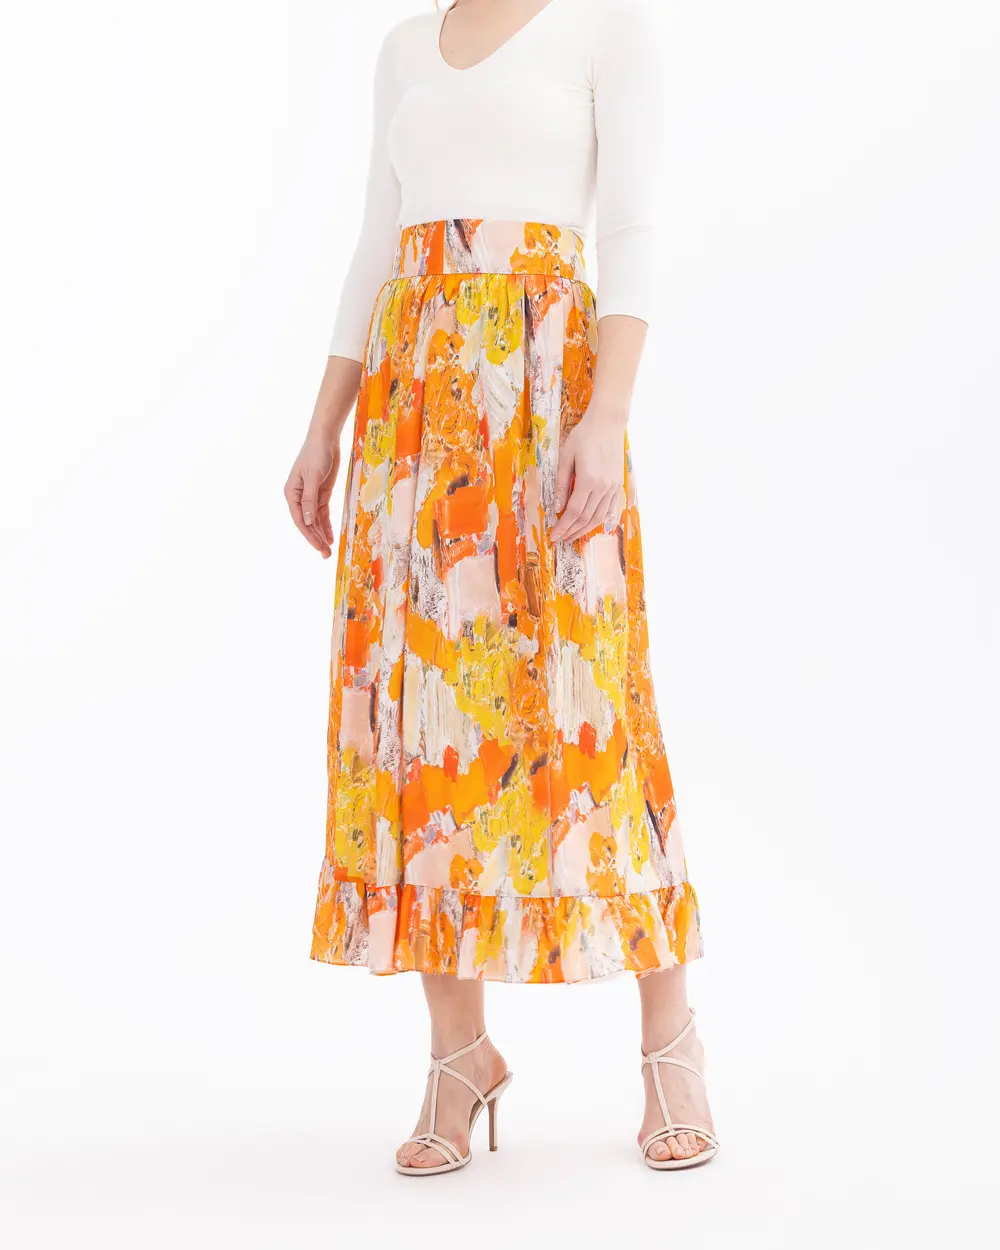 Maxi Length Skirt with Color Transition